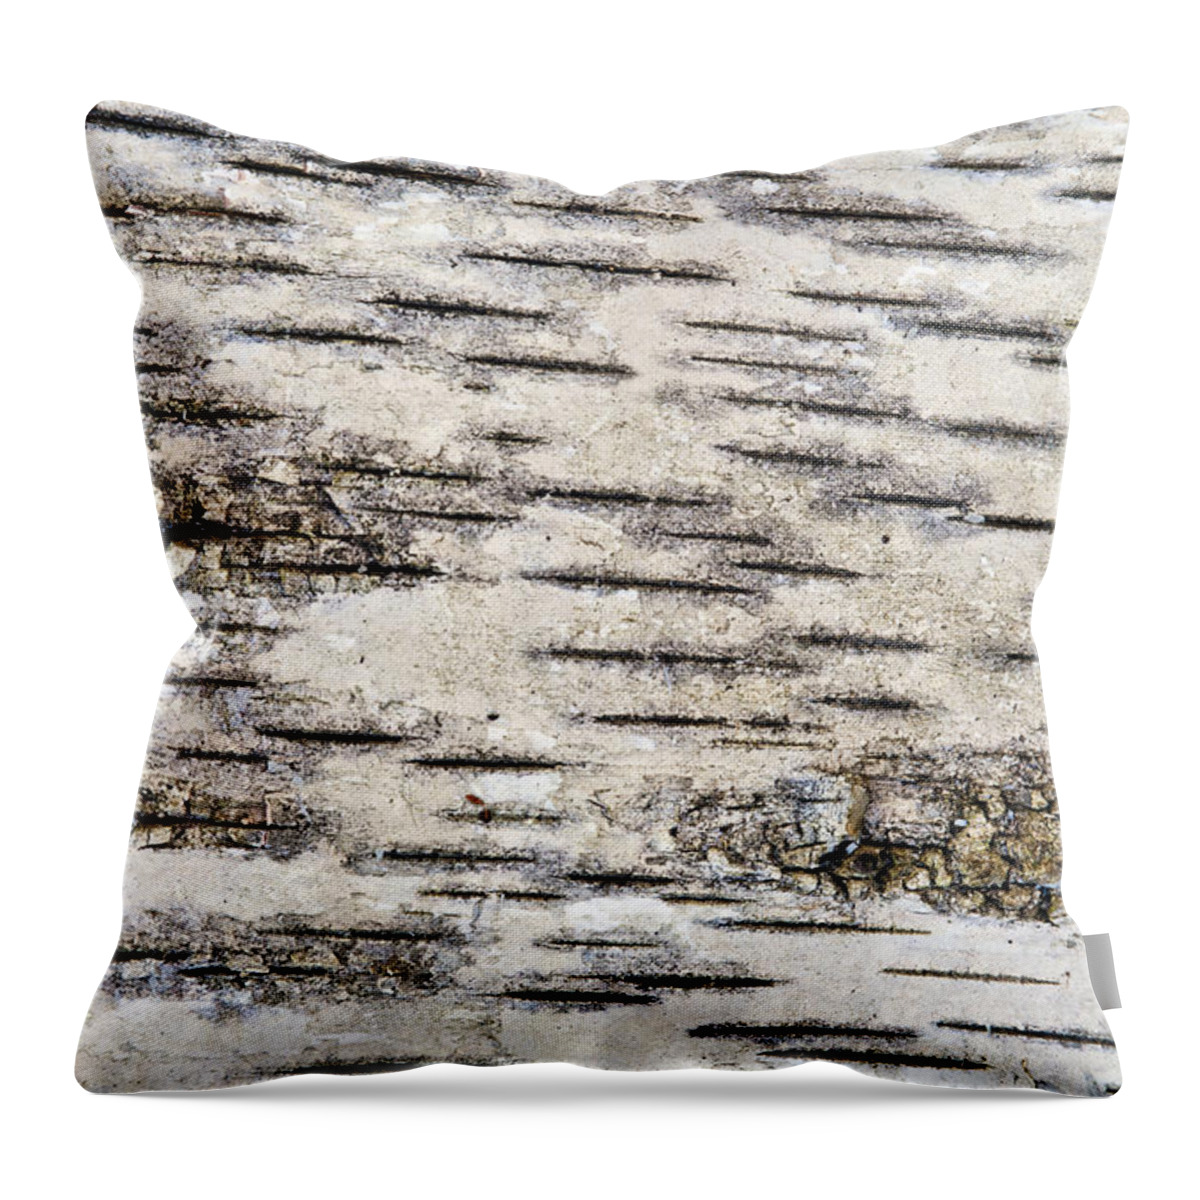 Abstract Throw Pillow featuring the photograph Birch Bark by Bill Brennan - Printscapes